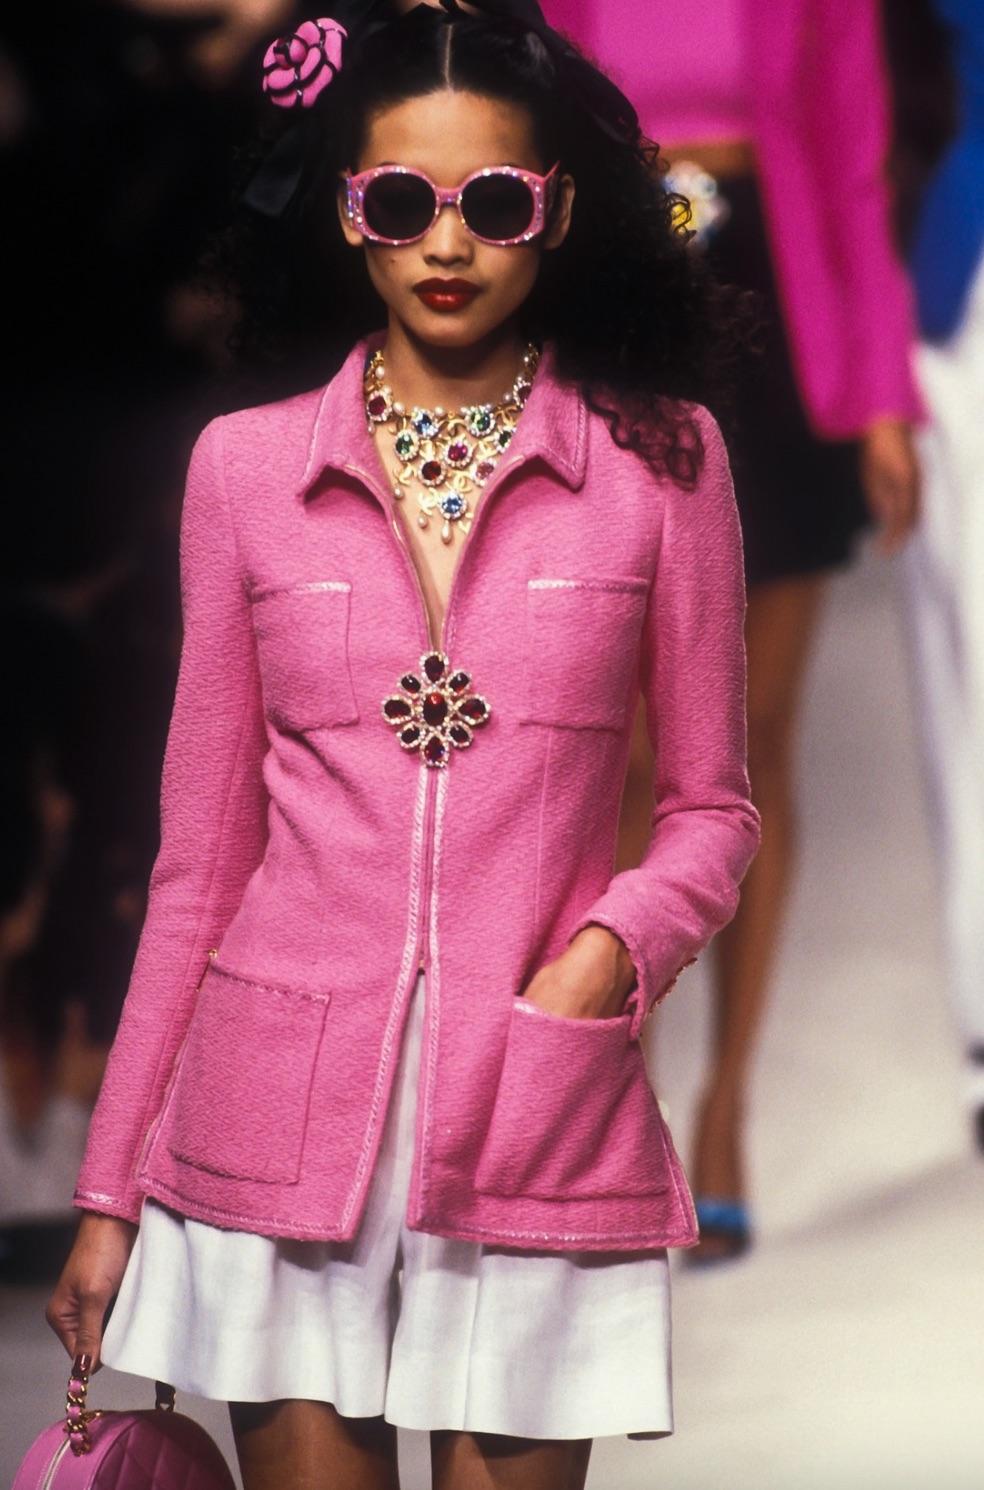 Presenting an extraordinary find: the rare pink tweed suit from Chanel's Spring/Summer 1995 